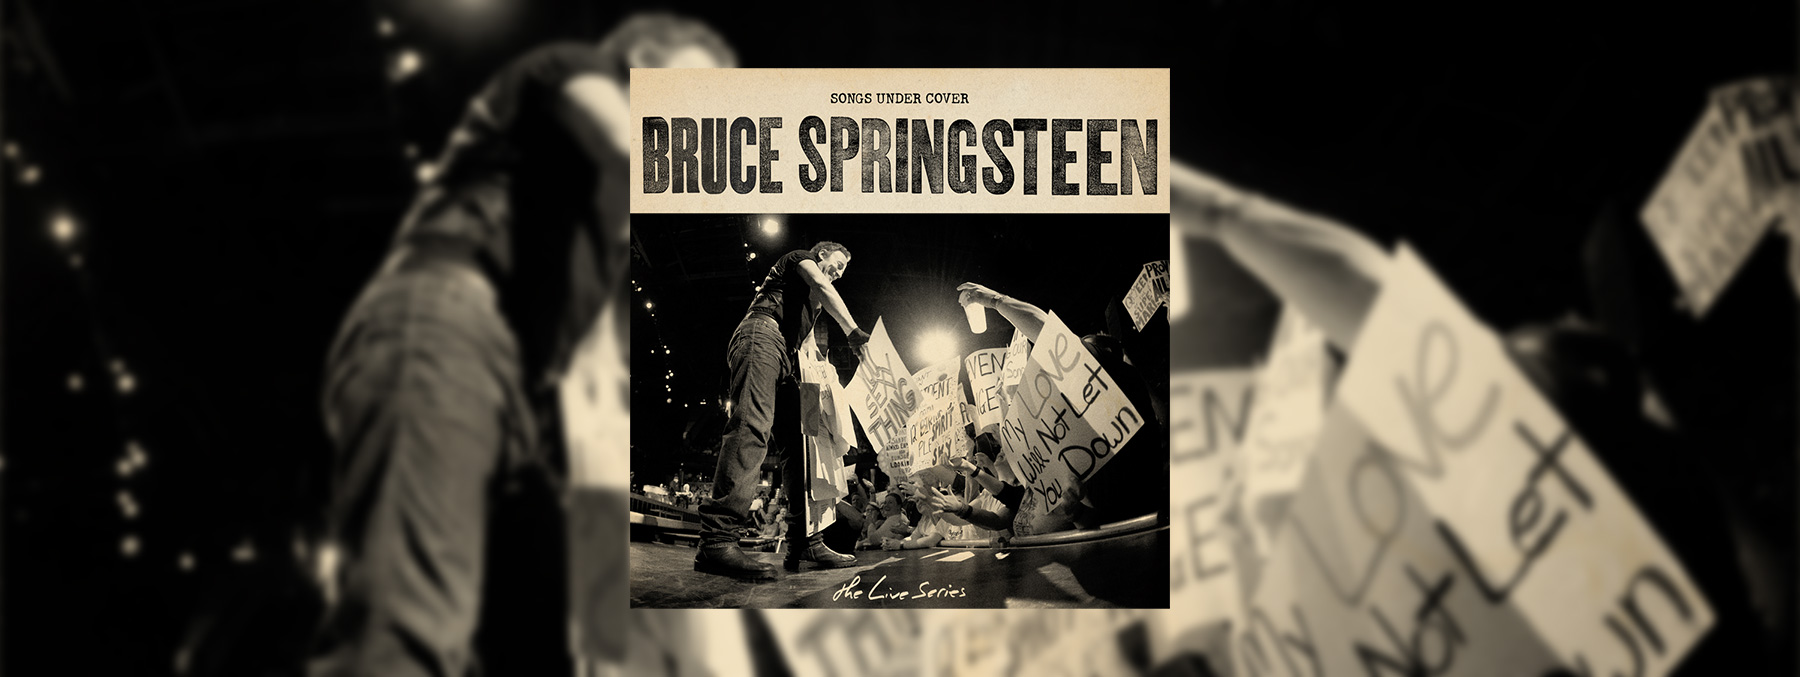 BRUCE SPRINGSTEEN – THE LIVE SERIES CONTINUES